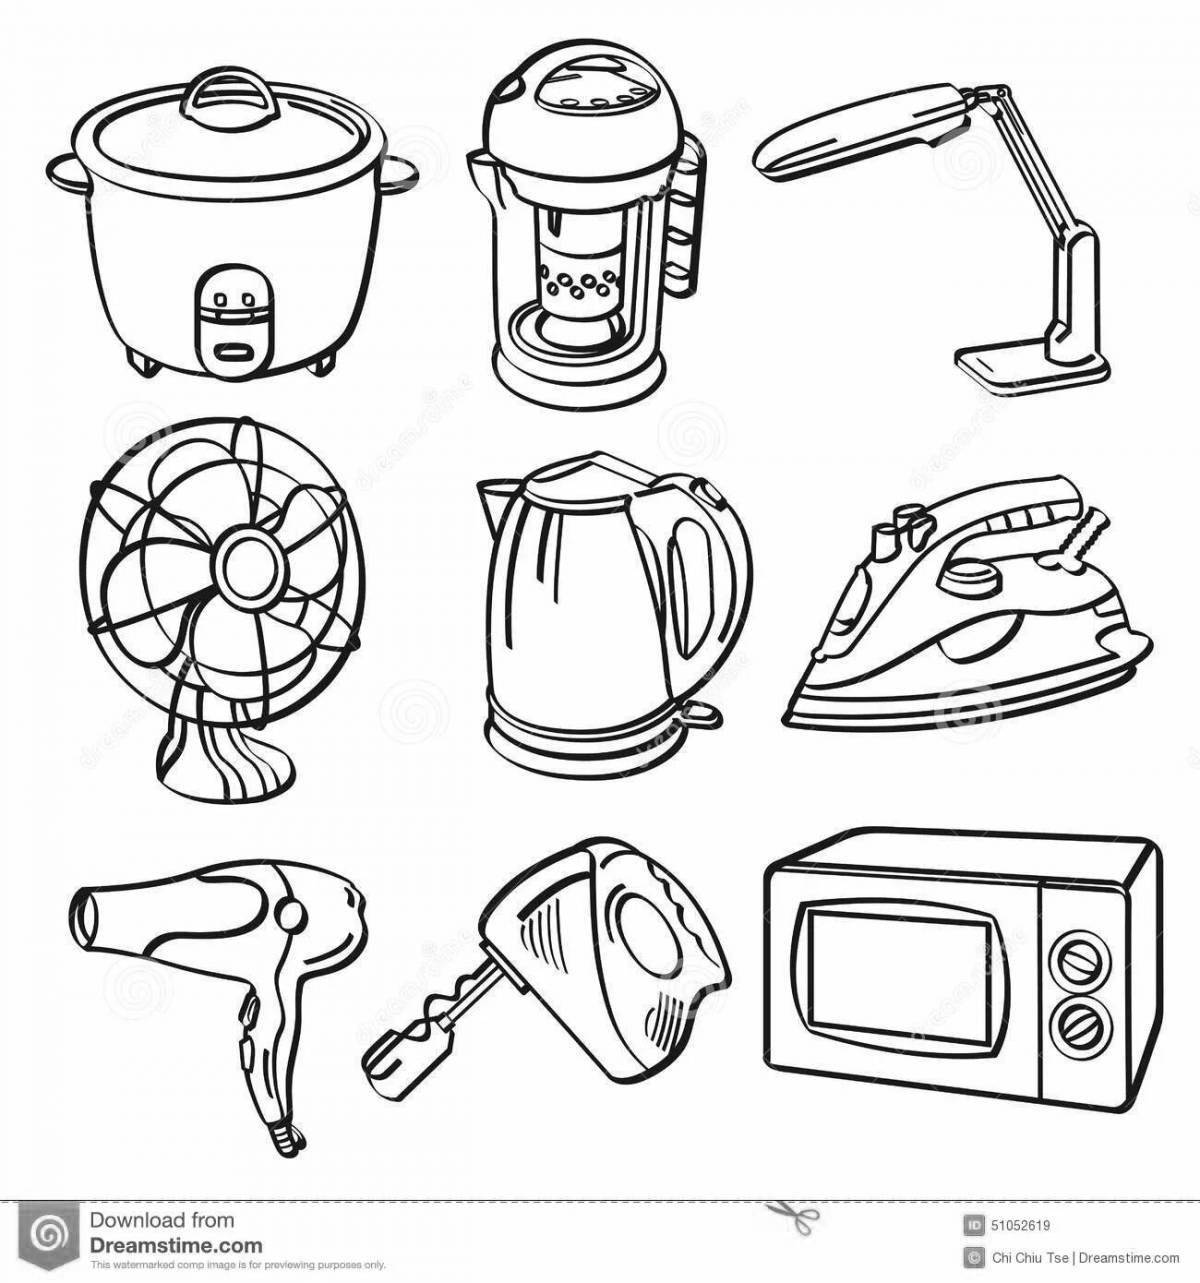 Coloring book magic home appliances for kids 2-3